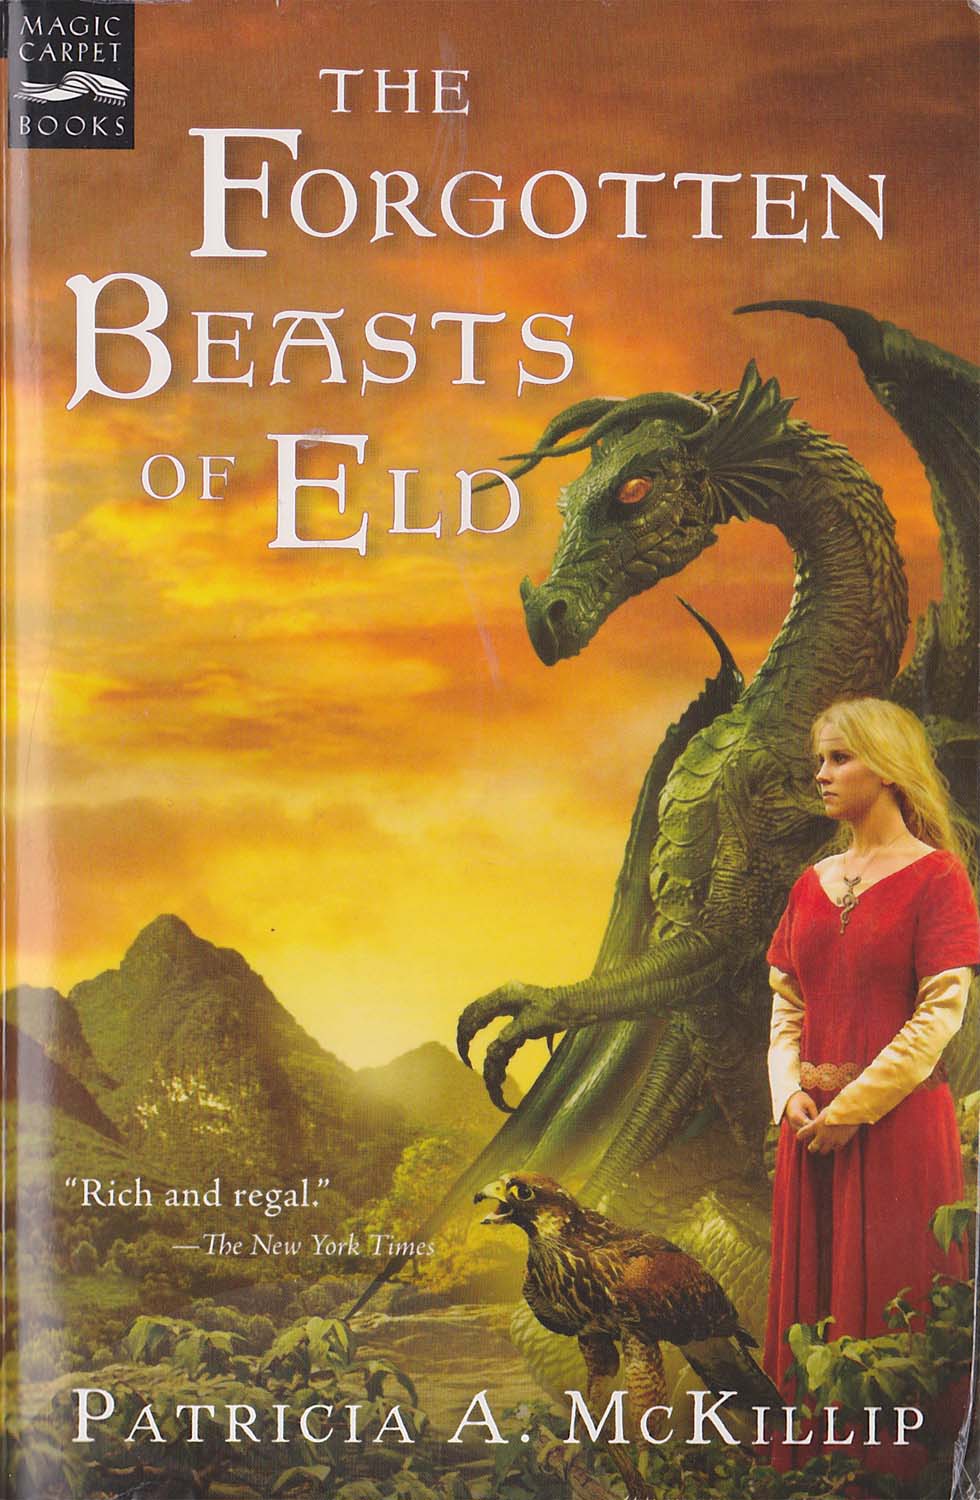 the forgotten beasts of eld by patricia a mckillip